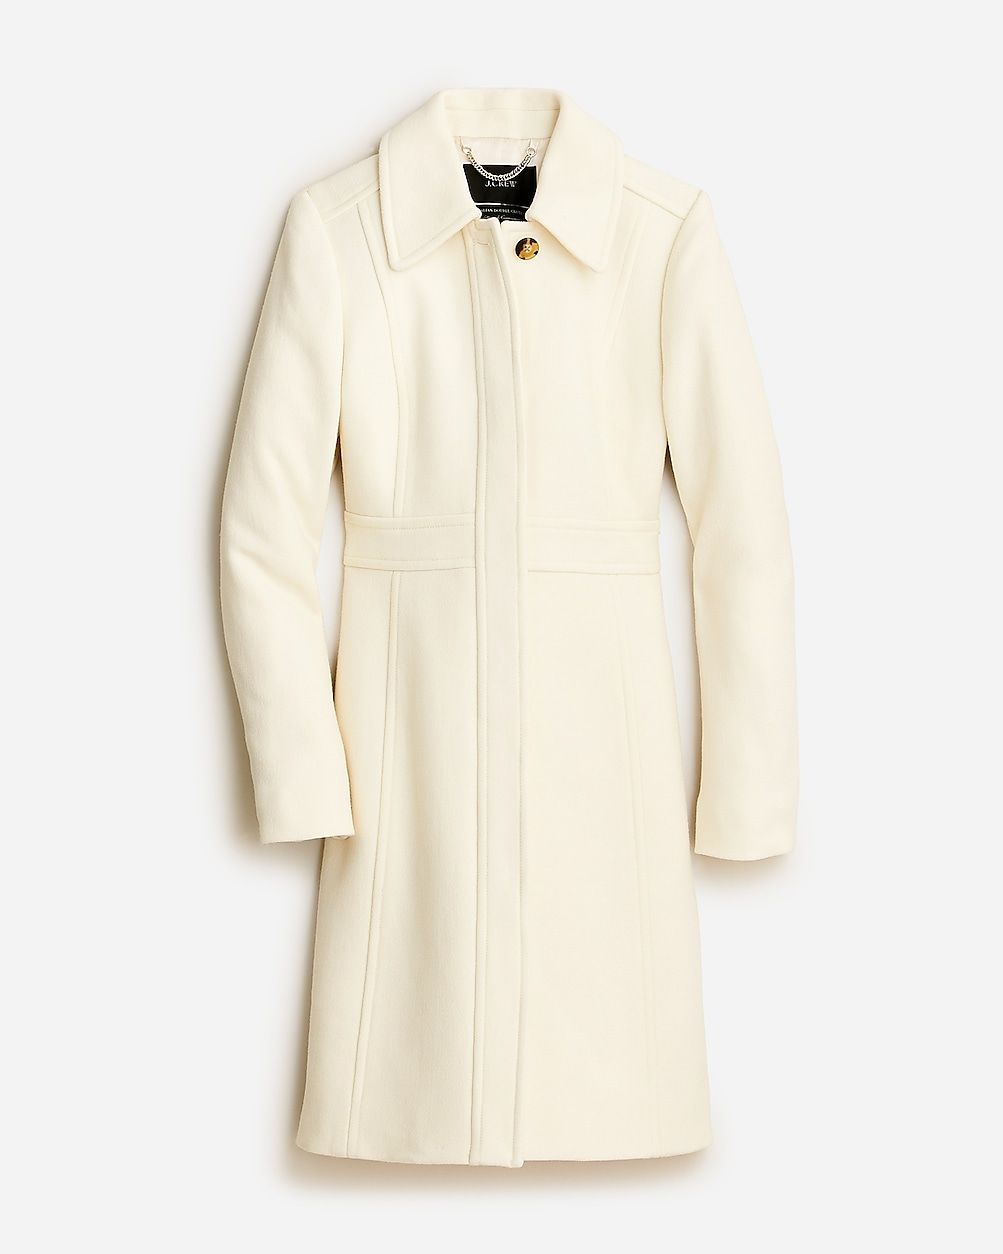 New lady day topcoat in Italian double-cloth wool blend | J.Crew US